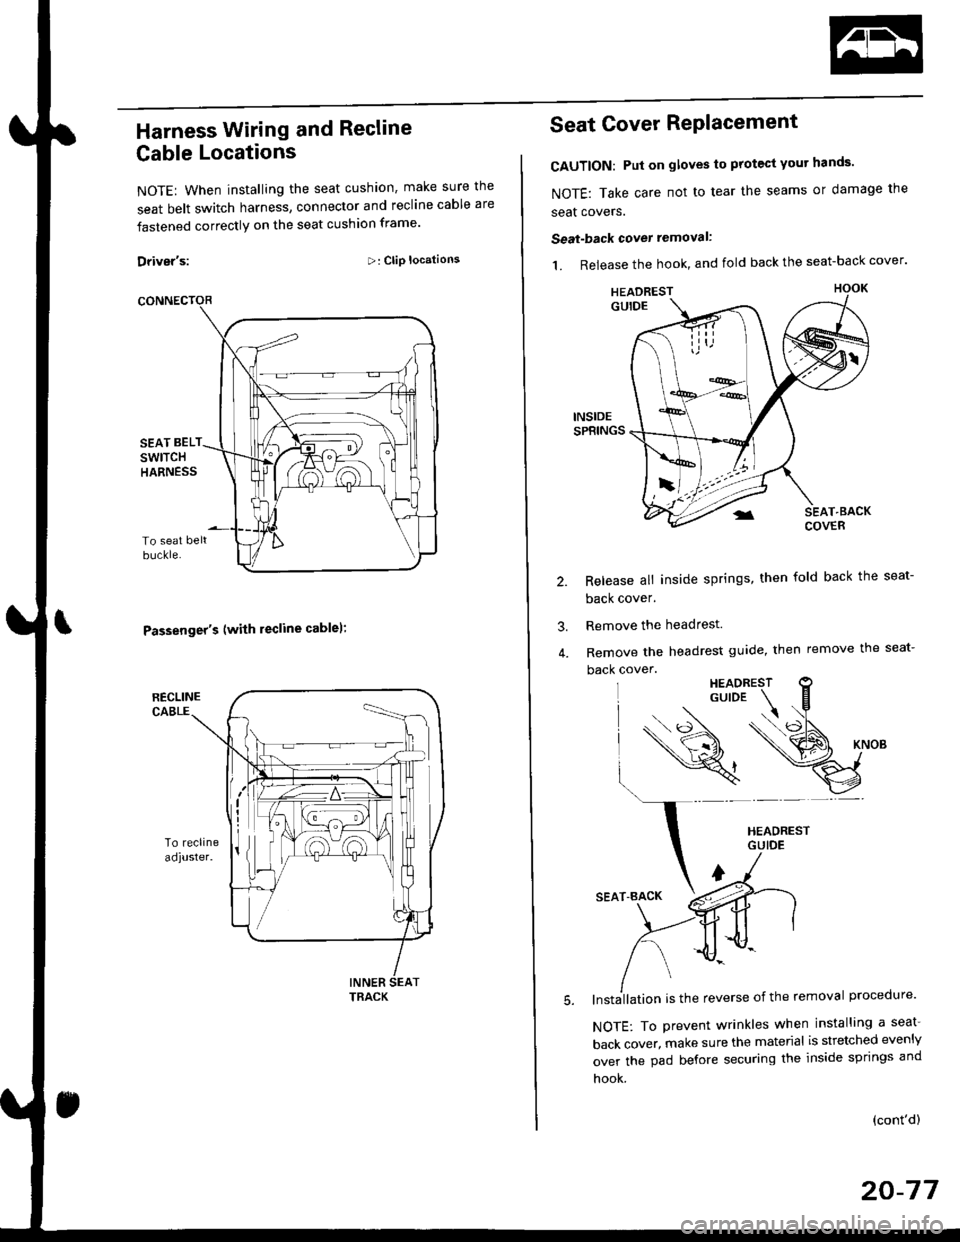 HONDA CIVIC 2000 6.G Workshop Manual Harness Wiring and Recline
Cable Locations
NOTE: When installing the seat cushion, make sure the
seat belt switch harness, connector and recline cable are
fastened correctly on the seat cushion frame